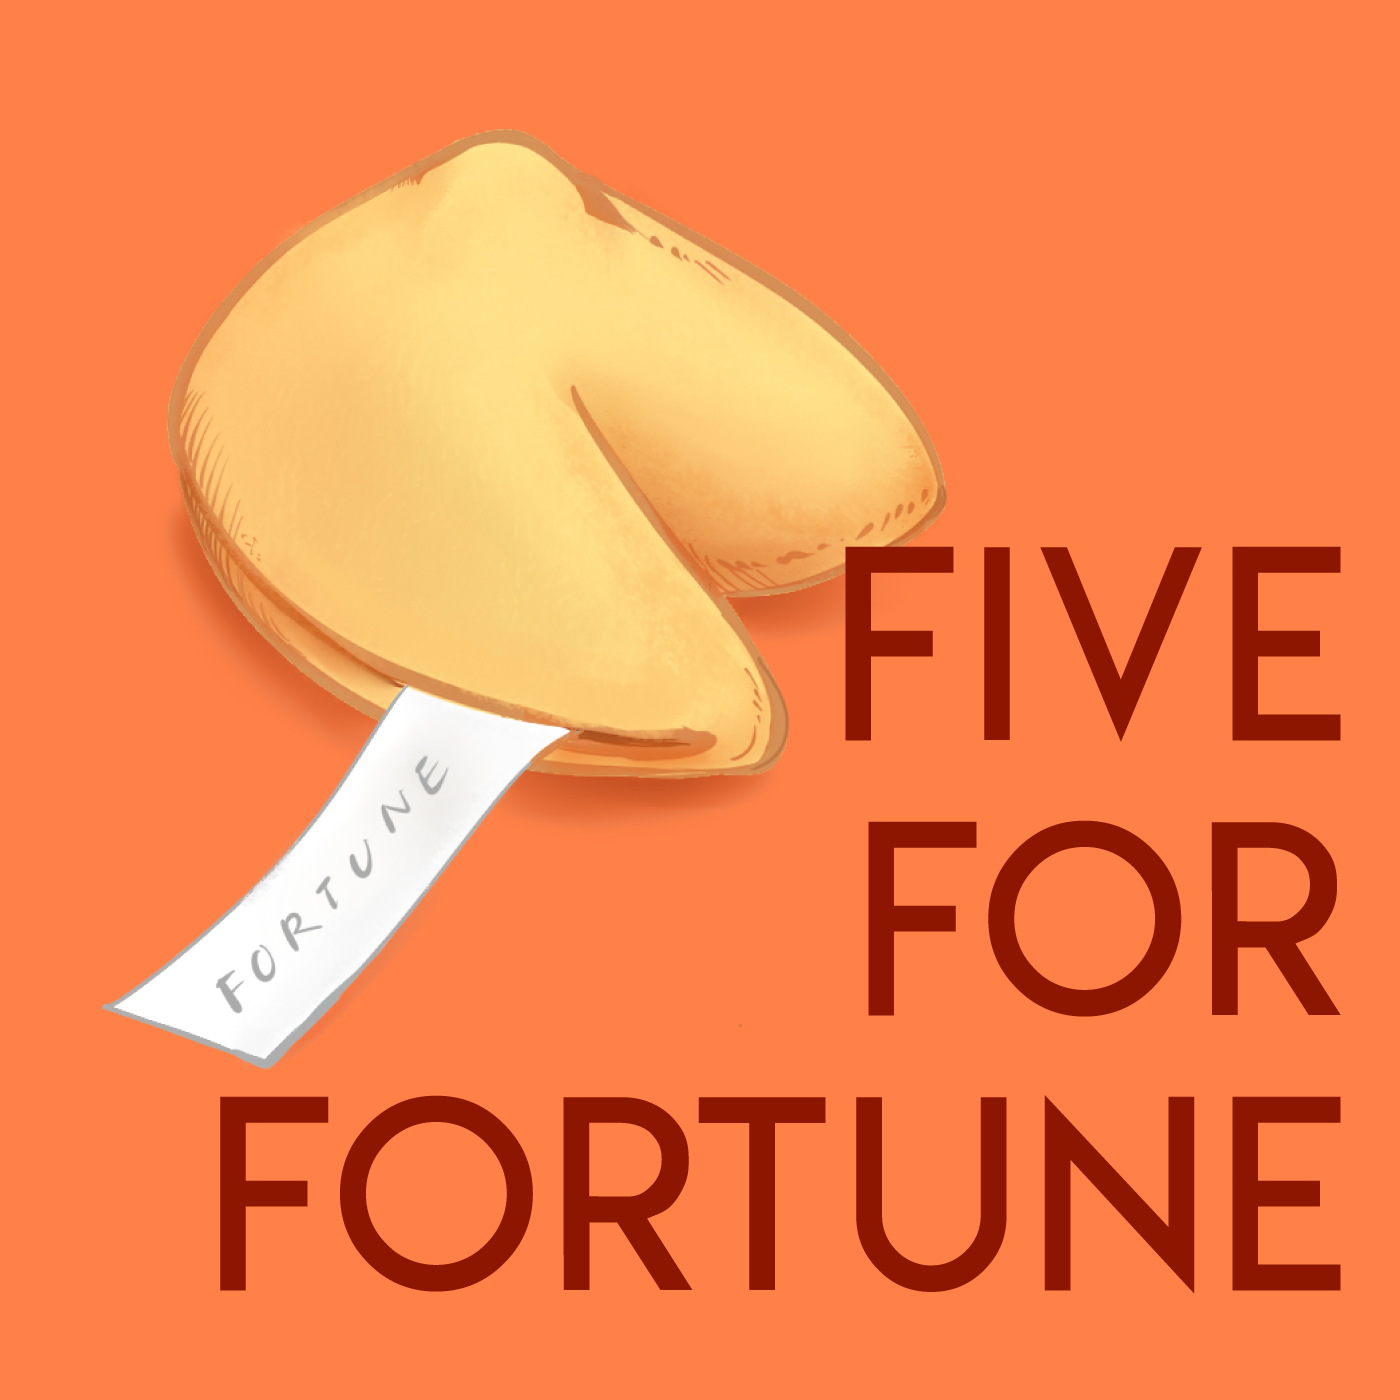 Five For Fortune Ep 1: 5 Tips for Increasing Productivity